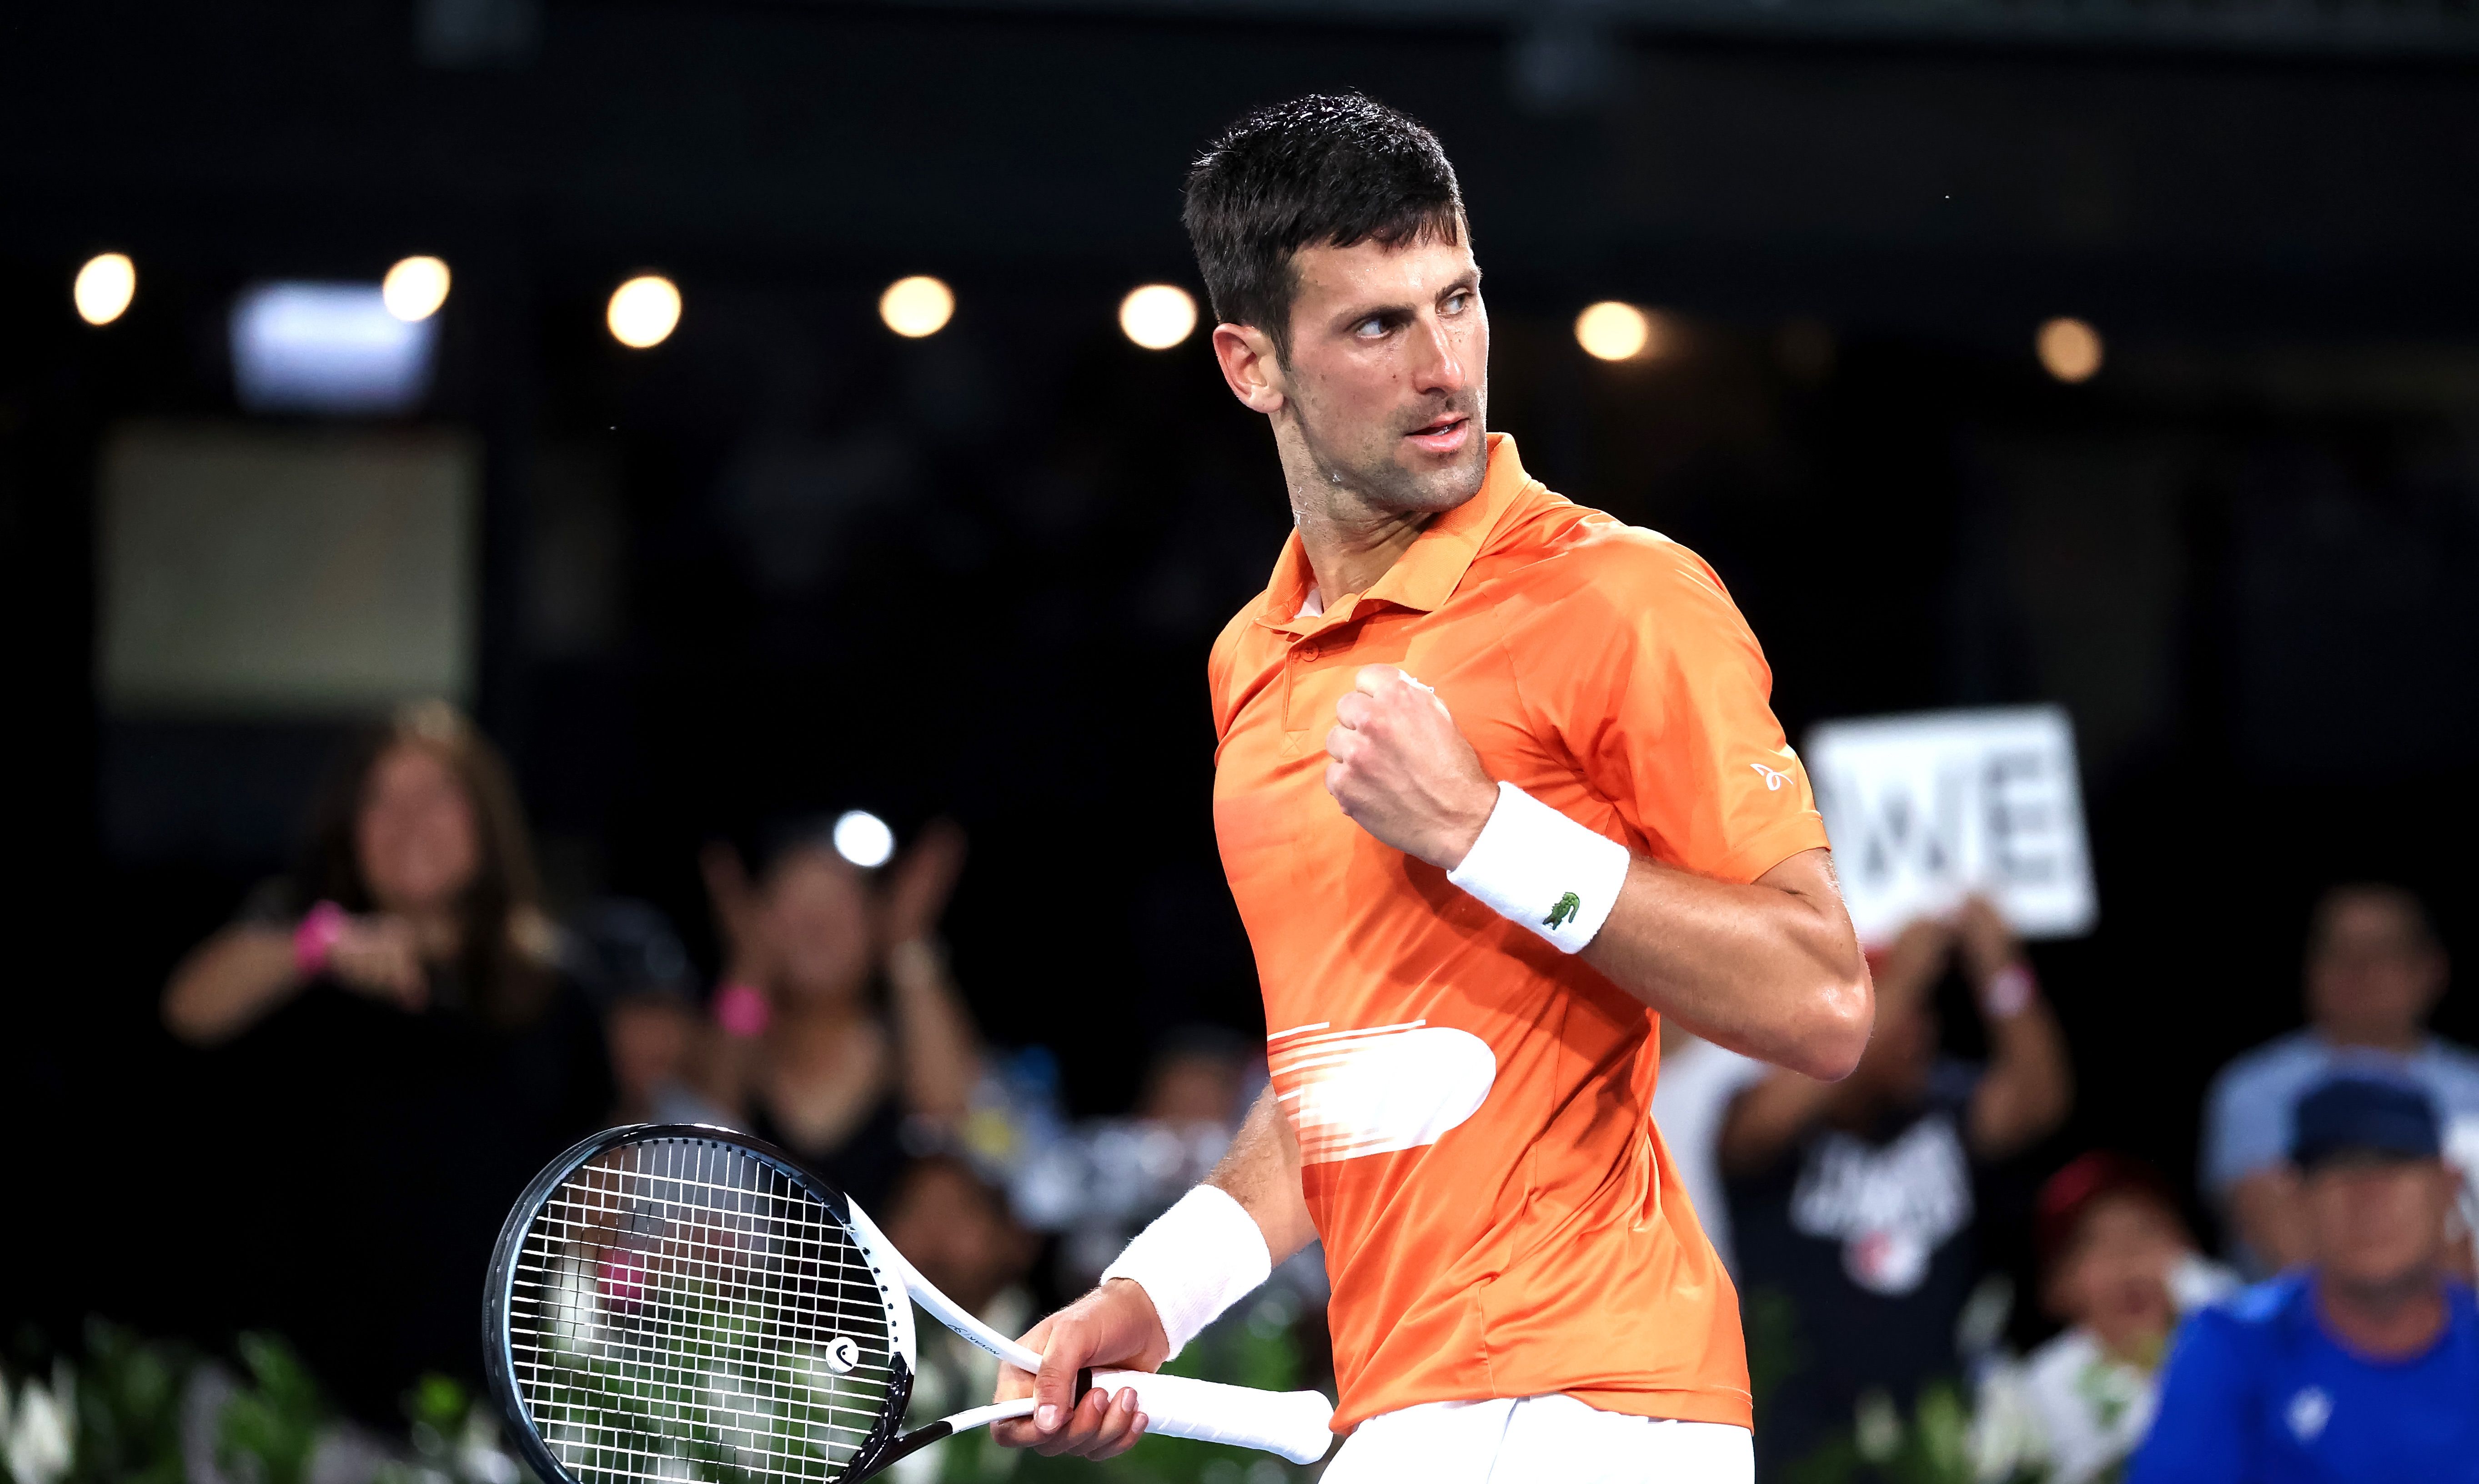 Novak Djokovic saves match point to defeat Sebastian Korda and capture 92nd ATP title of career in Adelaide